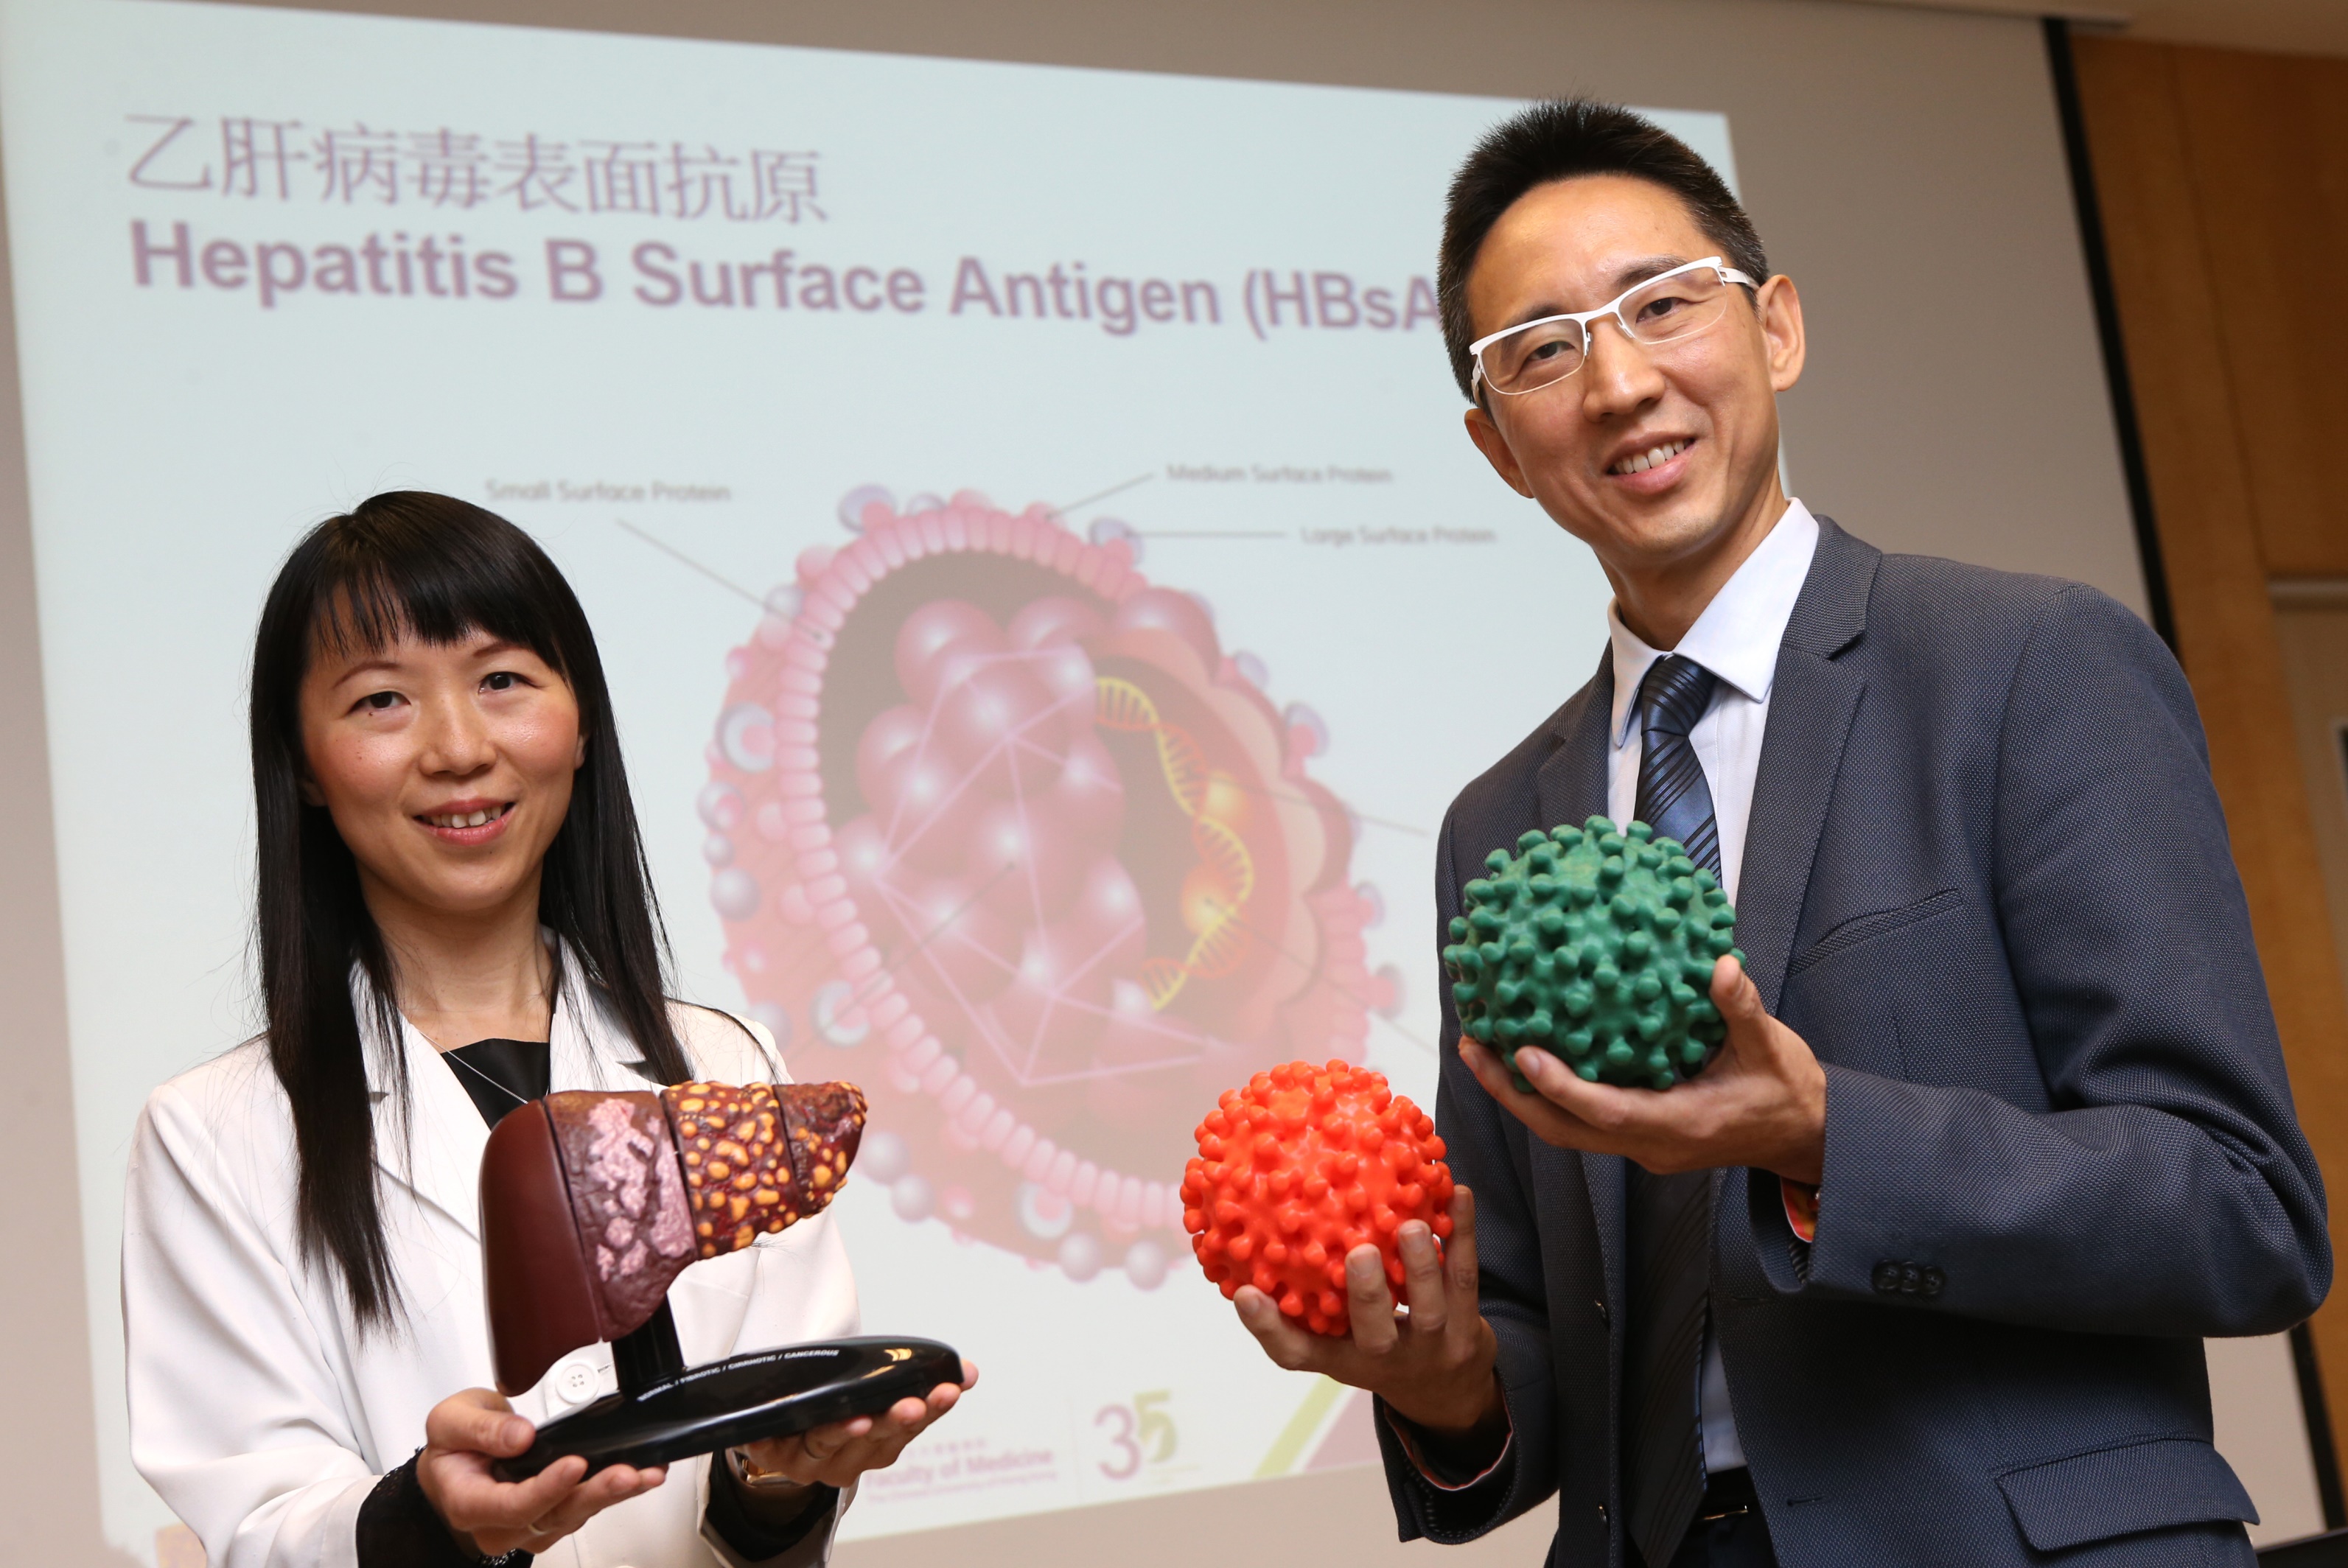 Researchers from the Faculty of Medicine of The Chinese University of Hong Kong (CUHK) find that patients with seroclearance of hepatitis B surface antigen (HBsAg), which means recovery of hepatitis B, are still at risk of developing liver cancer. Study results show that male patients who achieved recovery after the age of 50 have a higher risk. Featured are (right) Professor Henry CHAN, Director of the Center for Liver Health, Faculty of Medicine at CUHK, and Professor Grace WONG, Division of Gastroenterology and Hepatology, Department of Medicine and Therapeutics, Faculty of Medicine at CUHK.